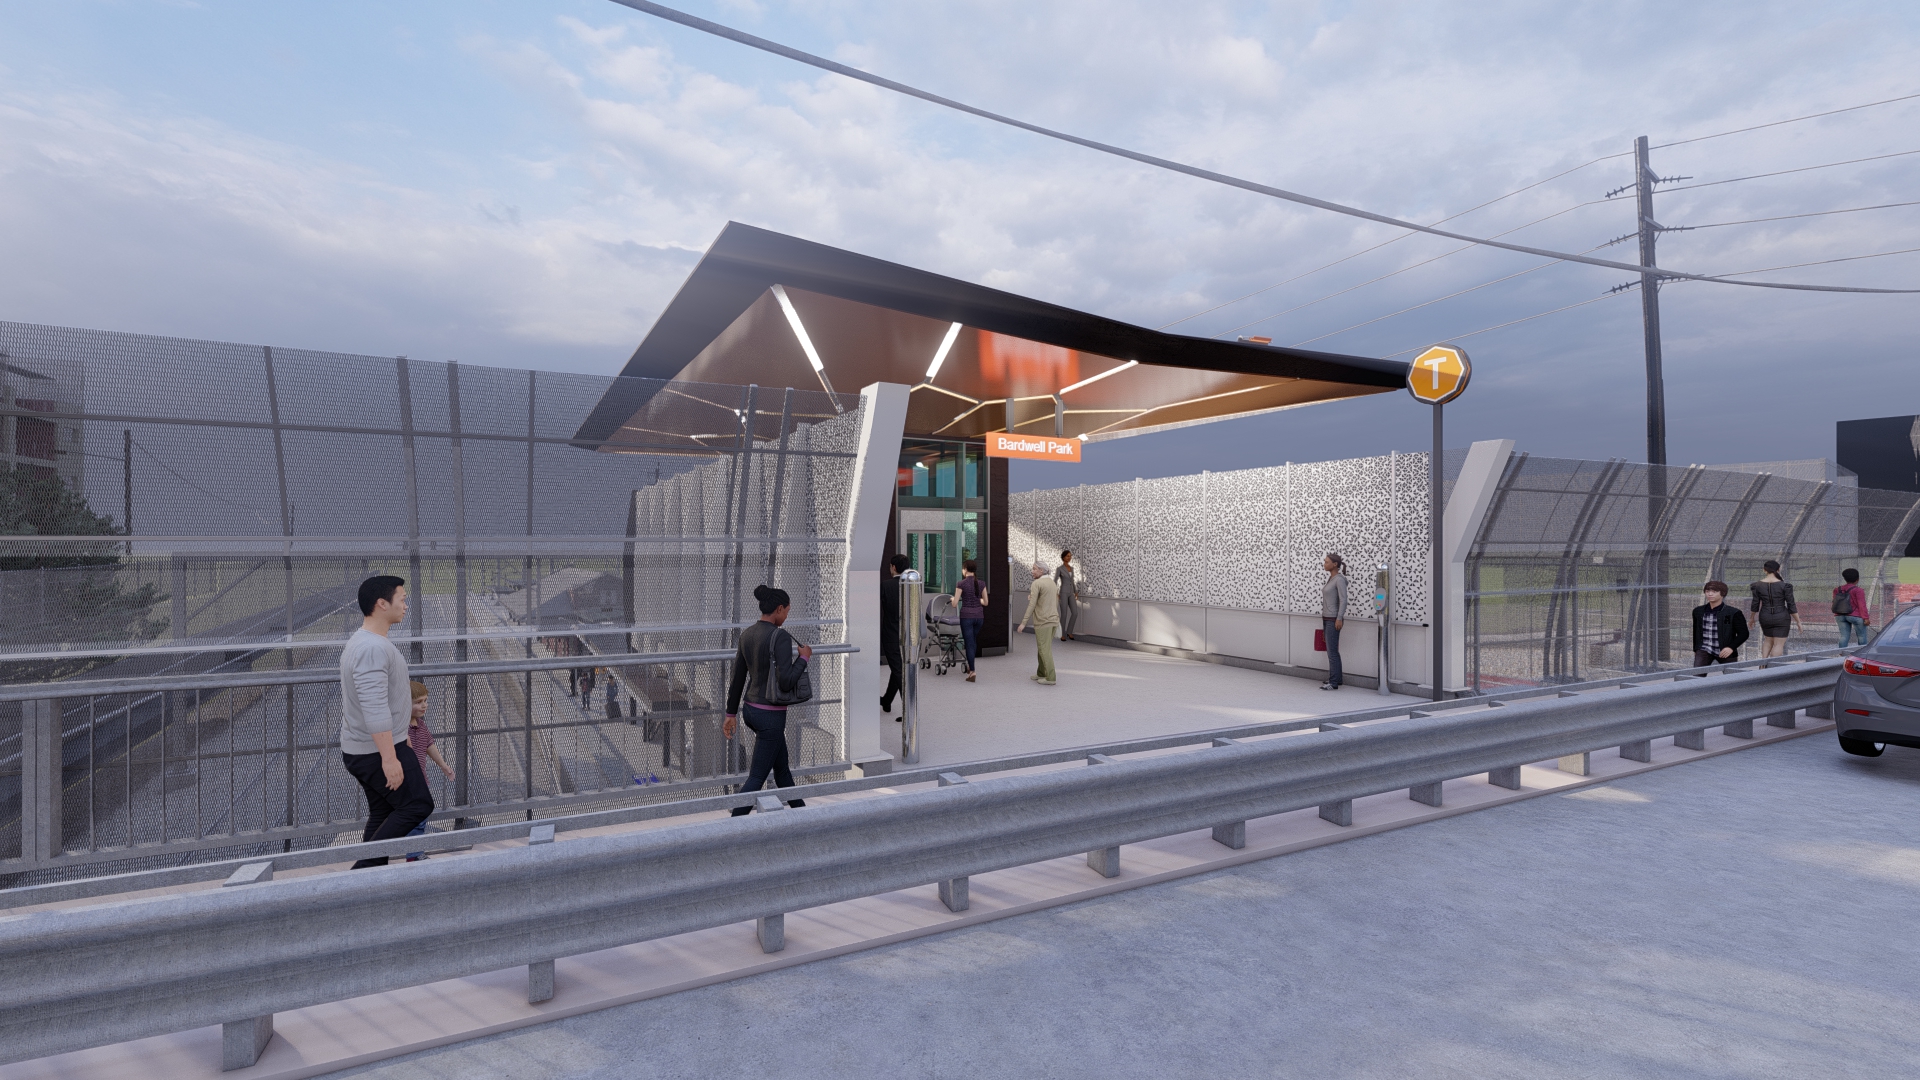 Artist’s impression of the proposed Bardwell Park Station Upgrade, subject to change during detailed design stage 